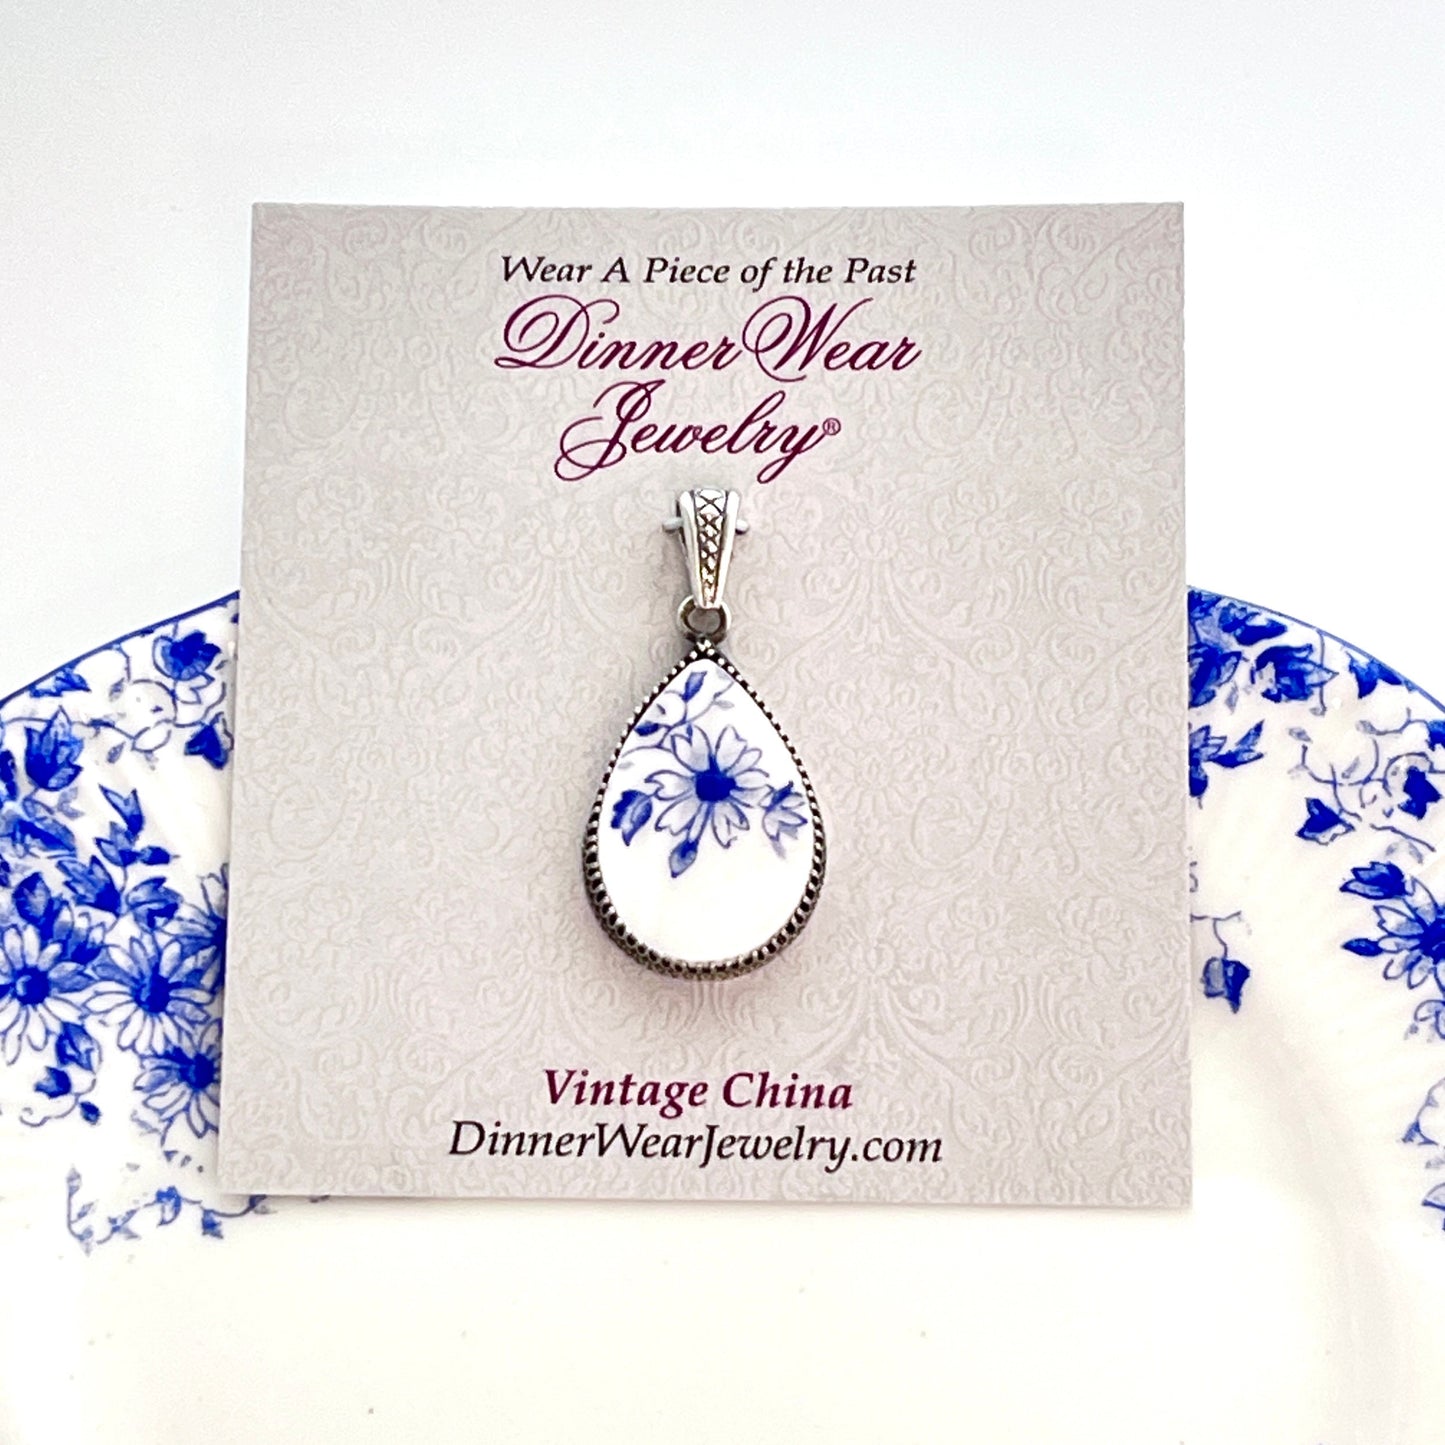 18" Broken China Jewelry Pendant, 20th Anniversary Gift for Wife, Daisy Necklace, Unique Gift for Her